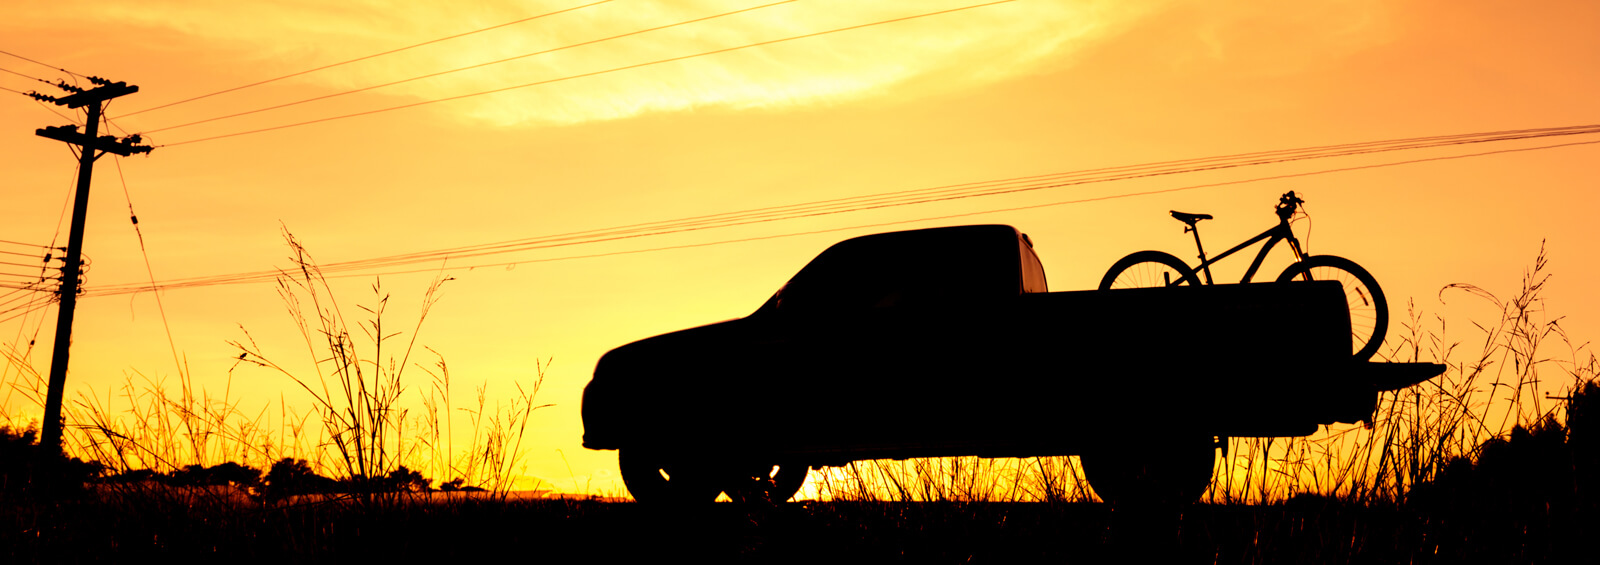 Silhouette Pickup Truck With Bicycle At Sunset Sky